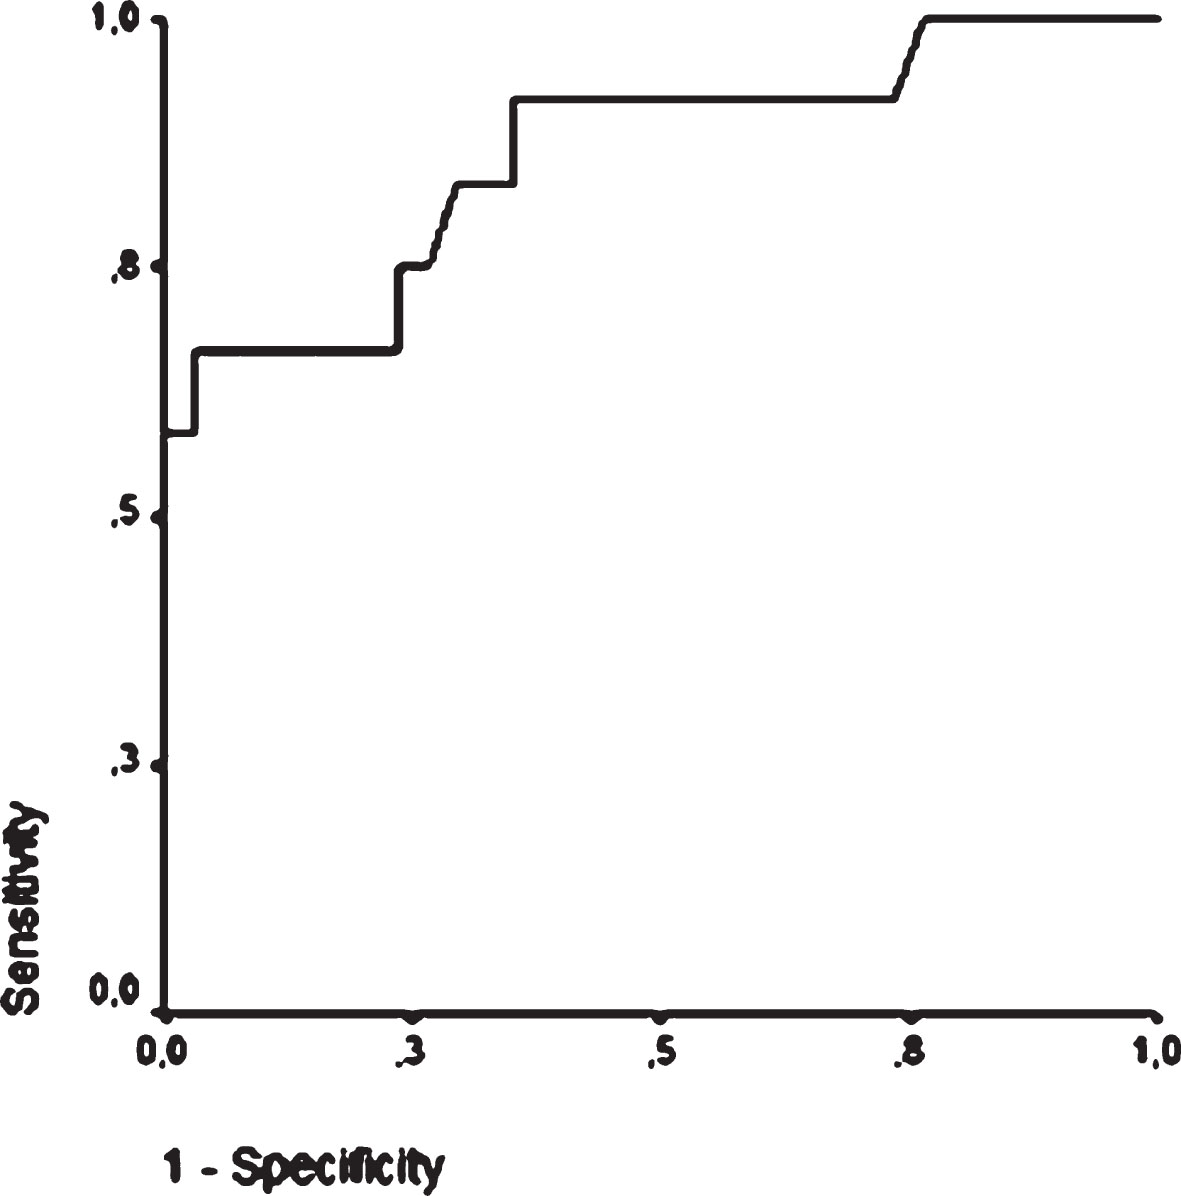 Receiver operating characteristic curve of AUC measured in the upper sample to confirm the non-responder status in post-stroke patients on clopidogrel. ROC analysis showes that AUC in the upper sample ≥62 indicates the non-responder status with a sensitivity of 84% and specificity of 71% (Area: 0.863, 95% CI: 0.728–0.998, p < 0.001).